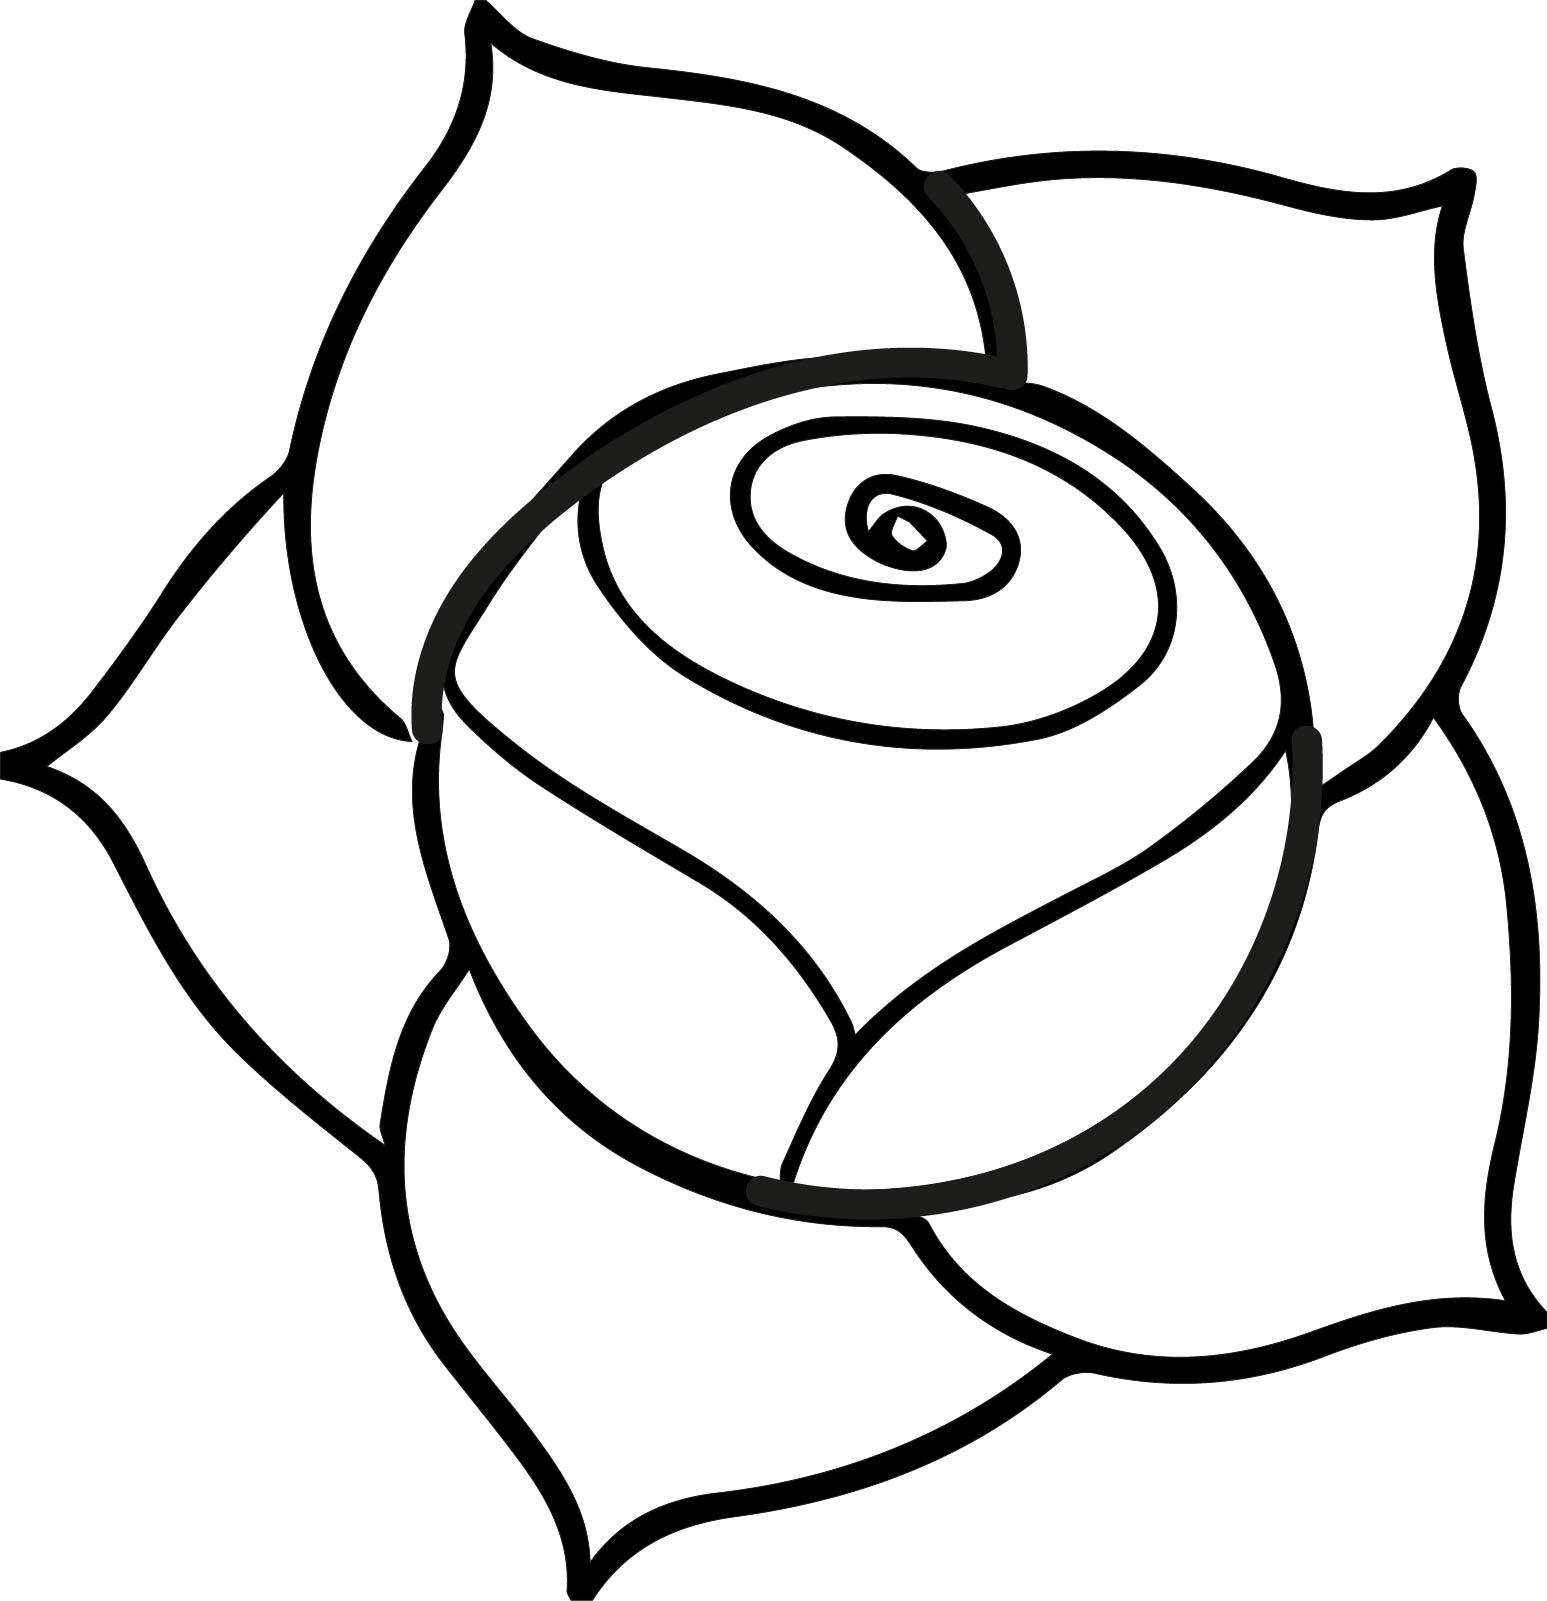 A Illustration Of A Pink Rose With Dark Outline On A White Background ...